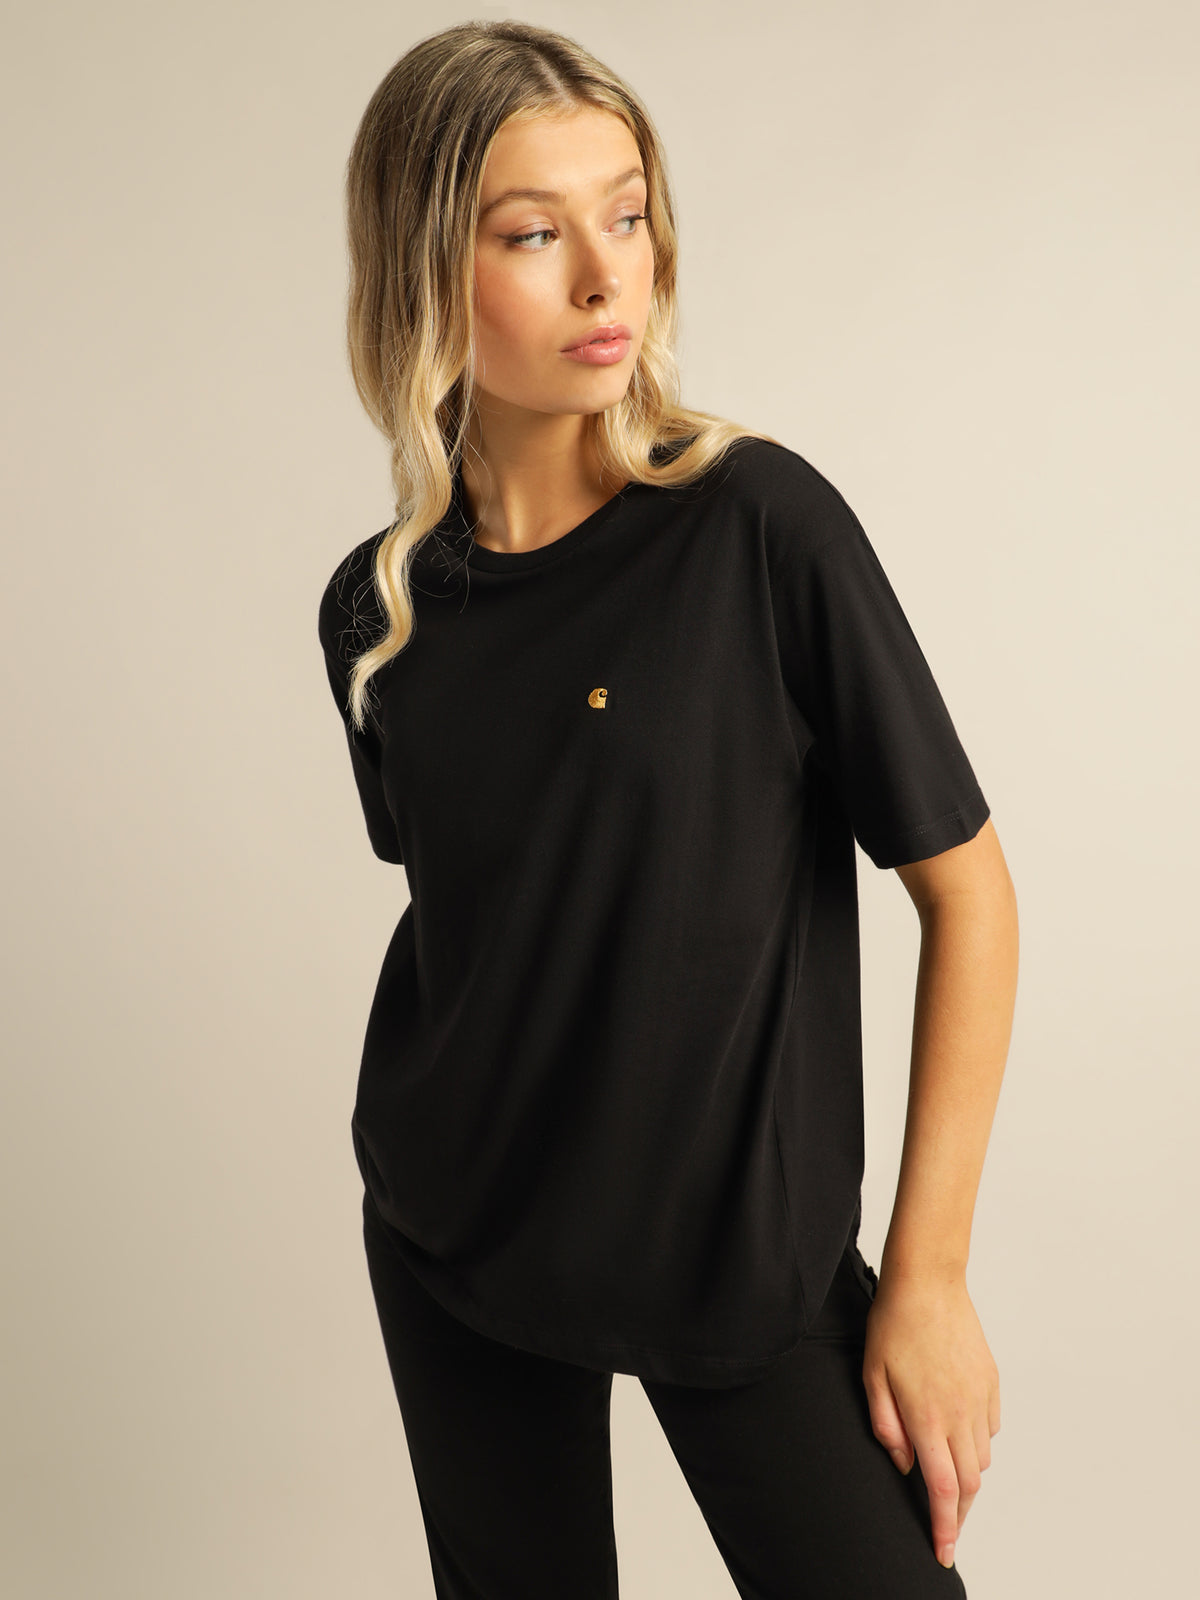 Short Sleeve Chase T-Shirt in Black and Gold